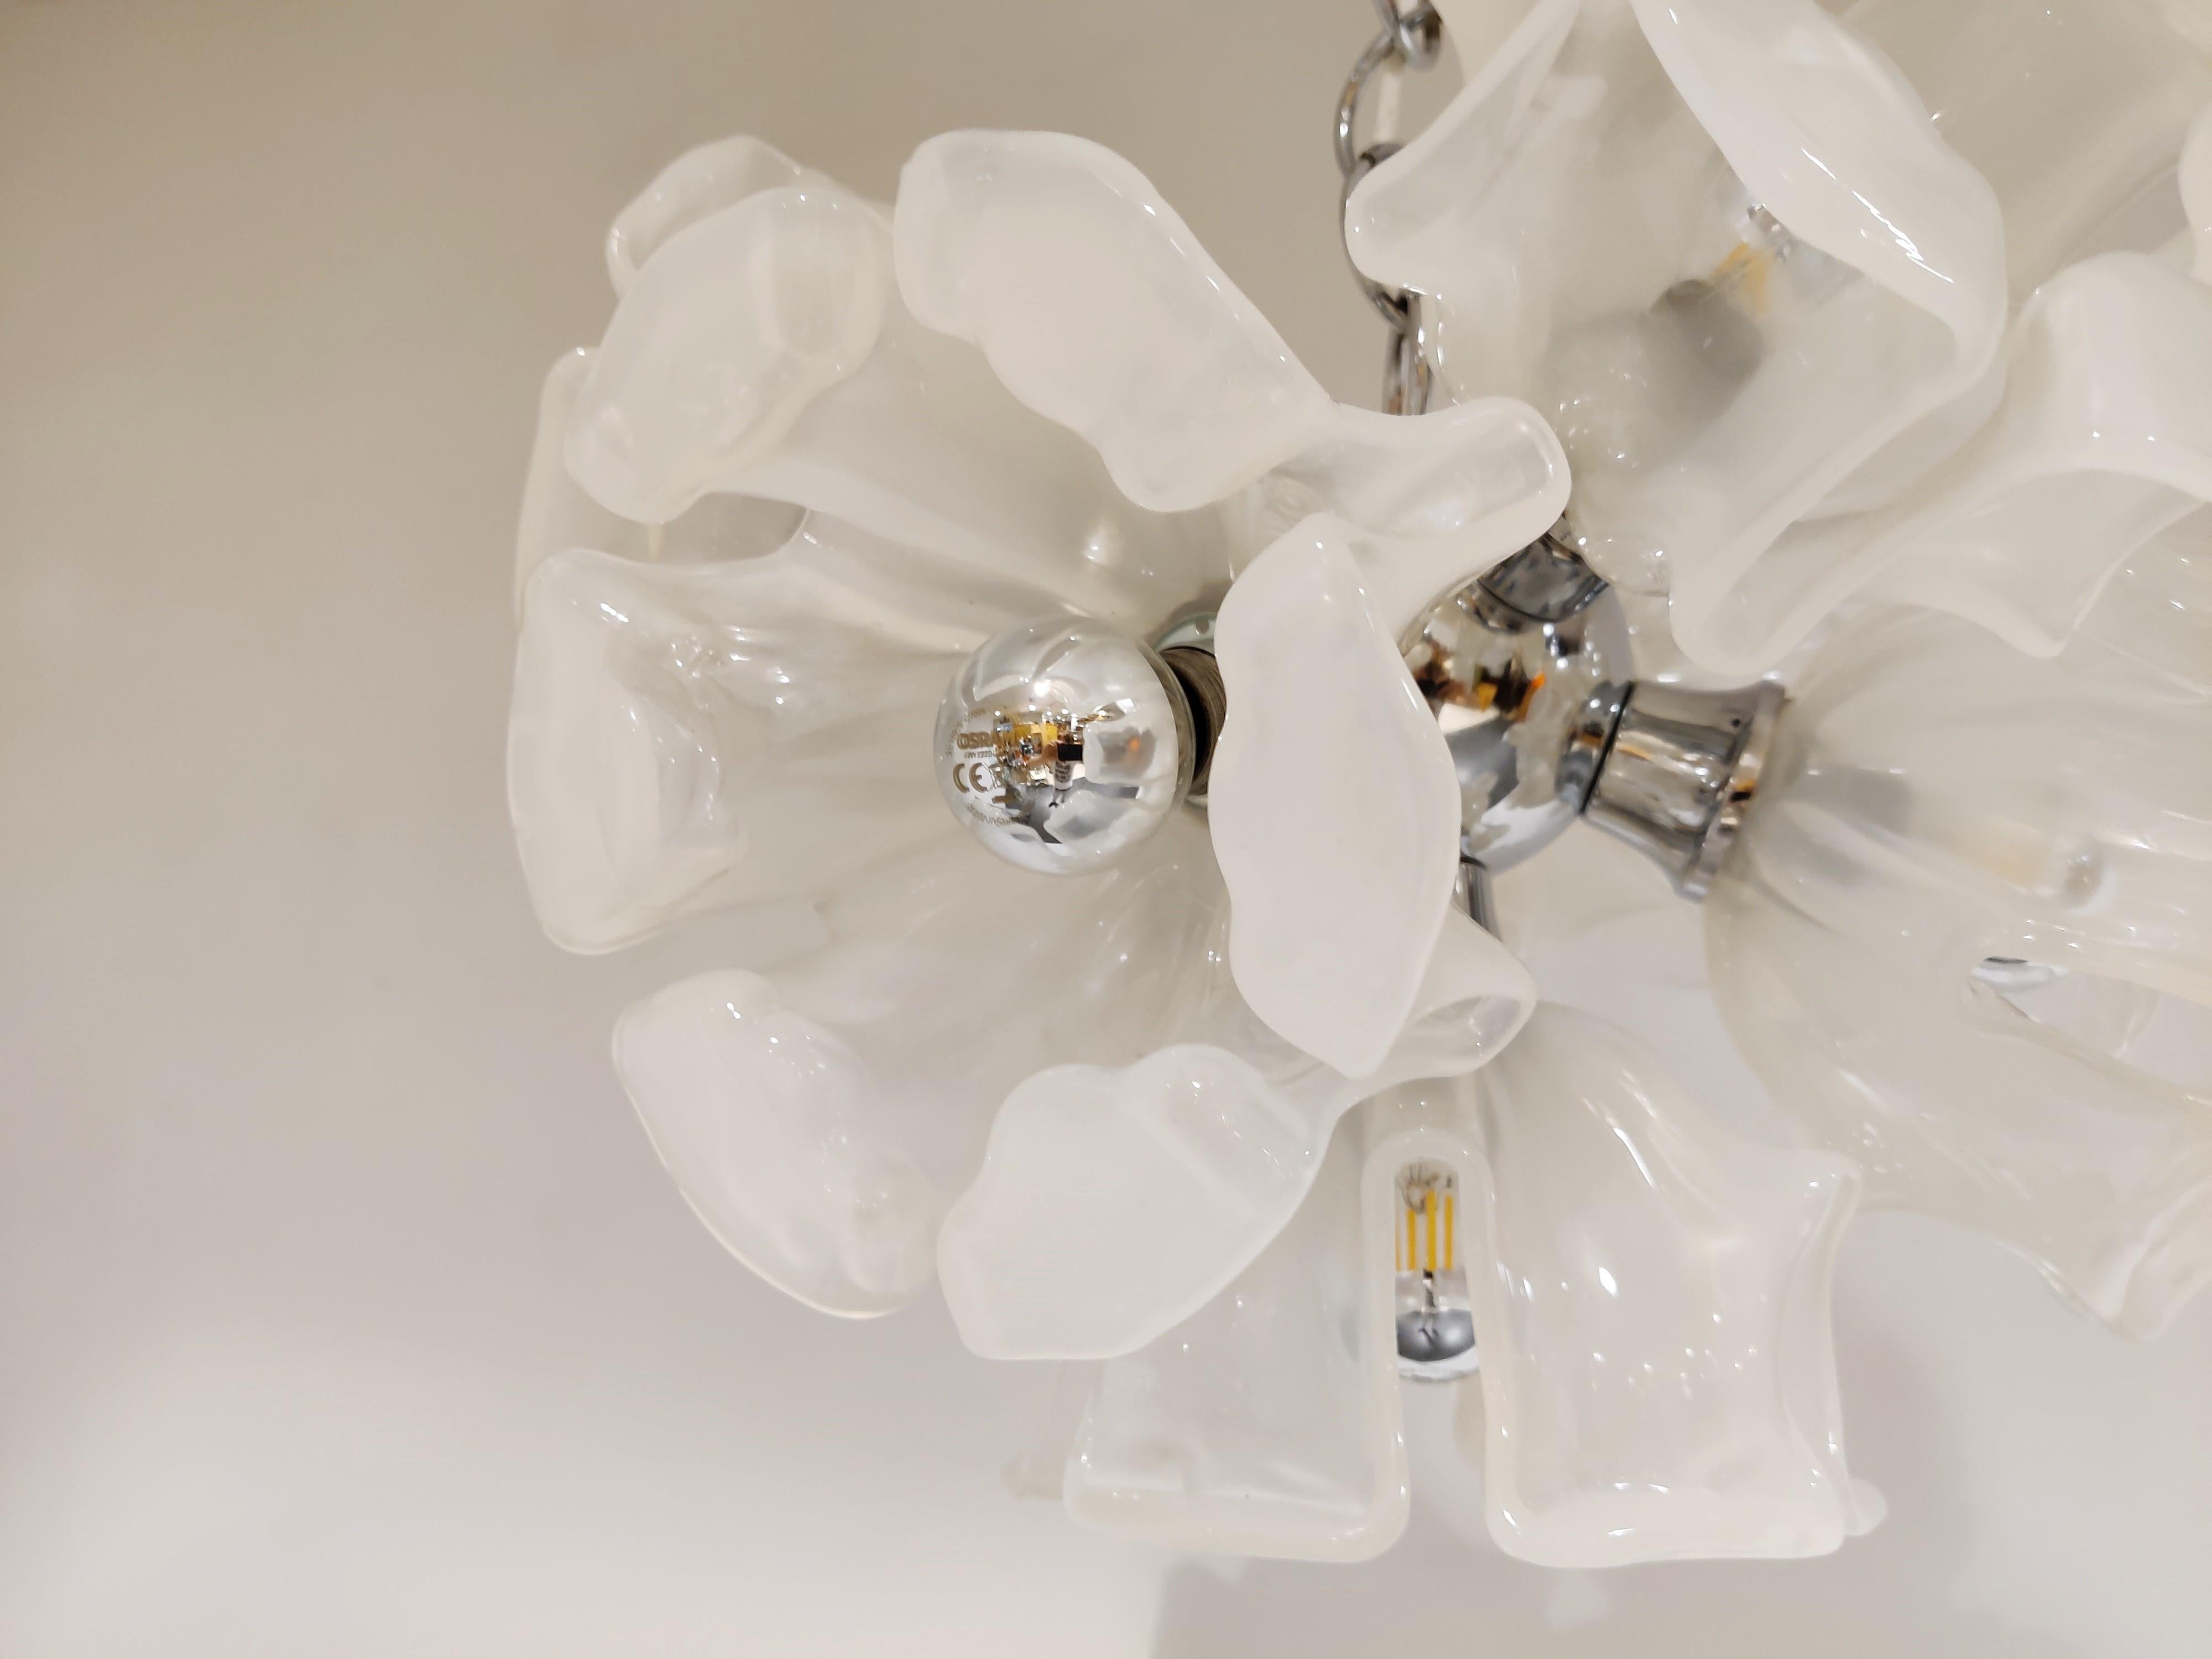 Mid century flower chandelier made from murano glass shades and a chrome frame.

Once illuminated, it creates an utterly charming ambience.

It takes seven E26/E27 light bulbs, tested and ready to use.

Good condition

1960s -